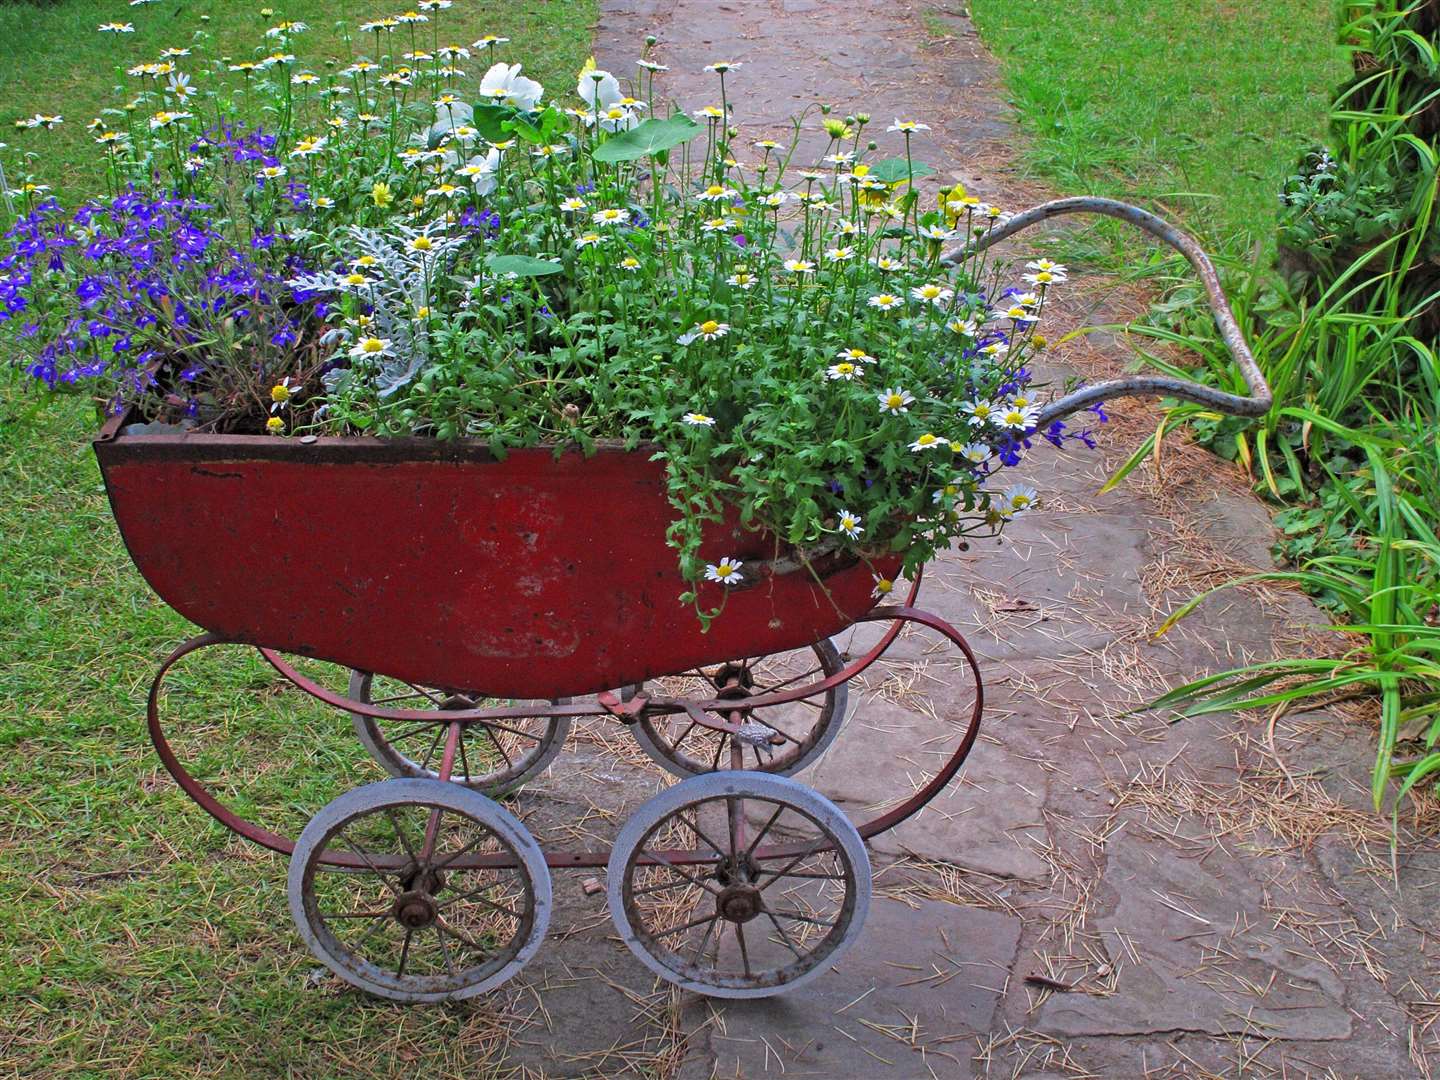 A flower container made from a recycled pram. Picture: Alamy/PA.